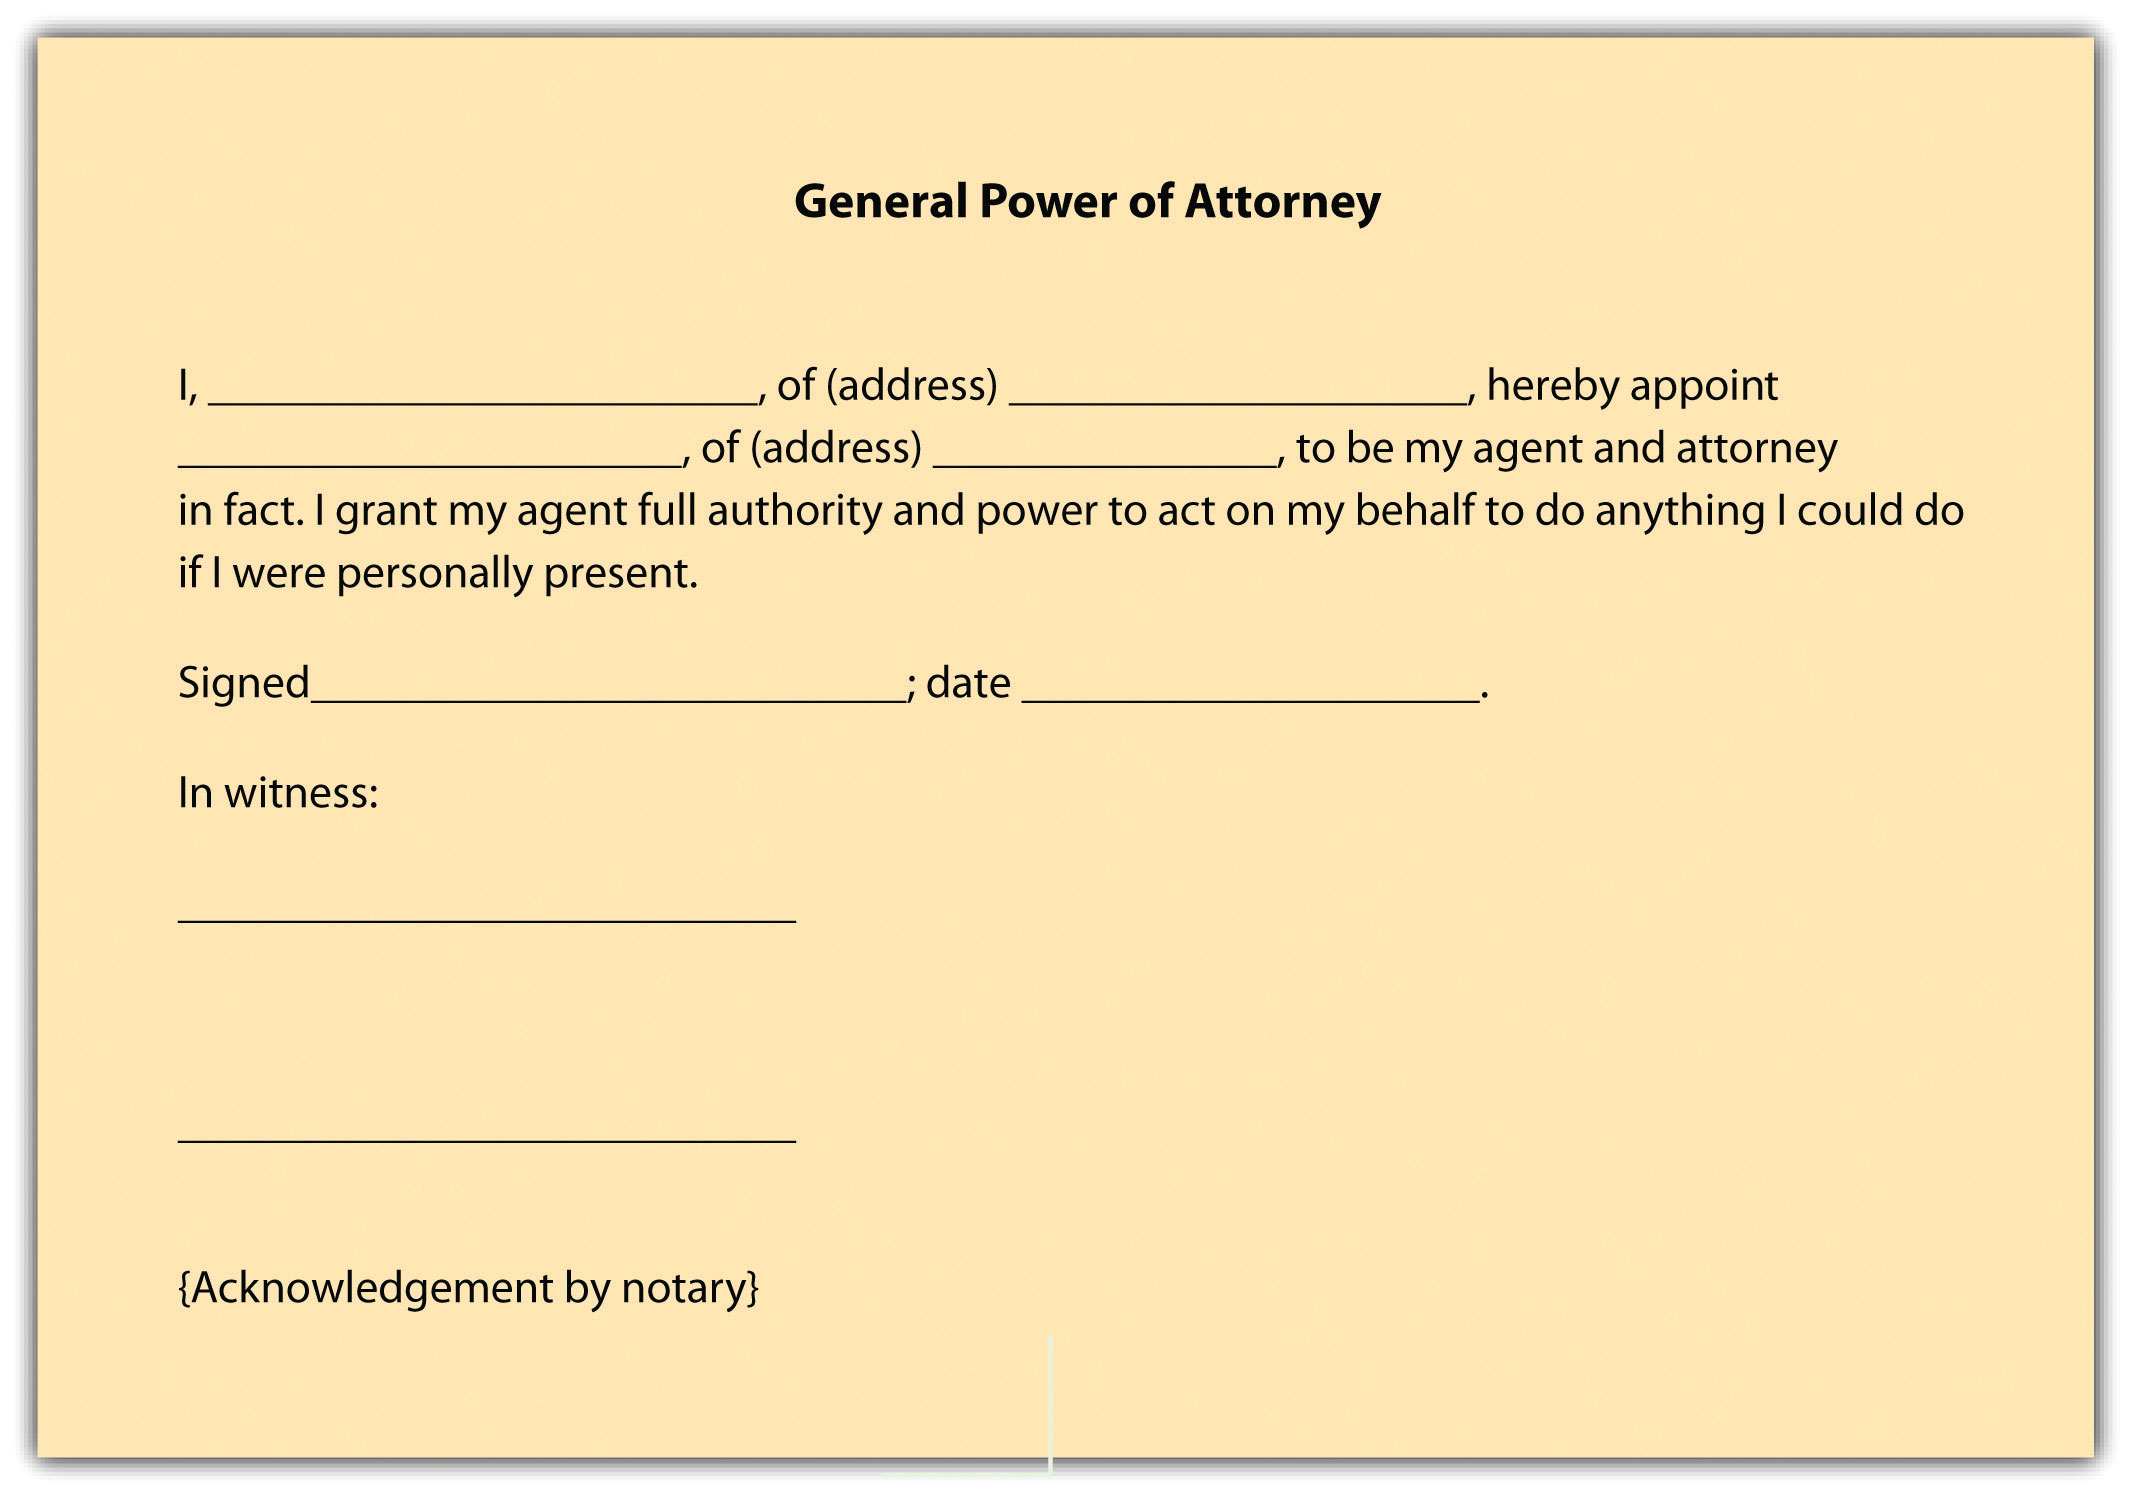 Image of a General Power of Attorney. It reads that a person grants another person 